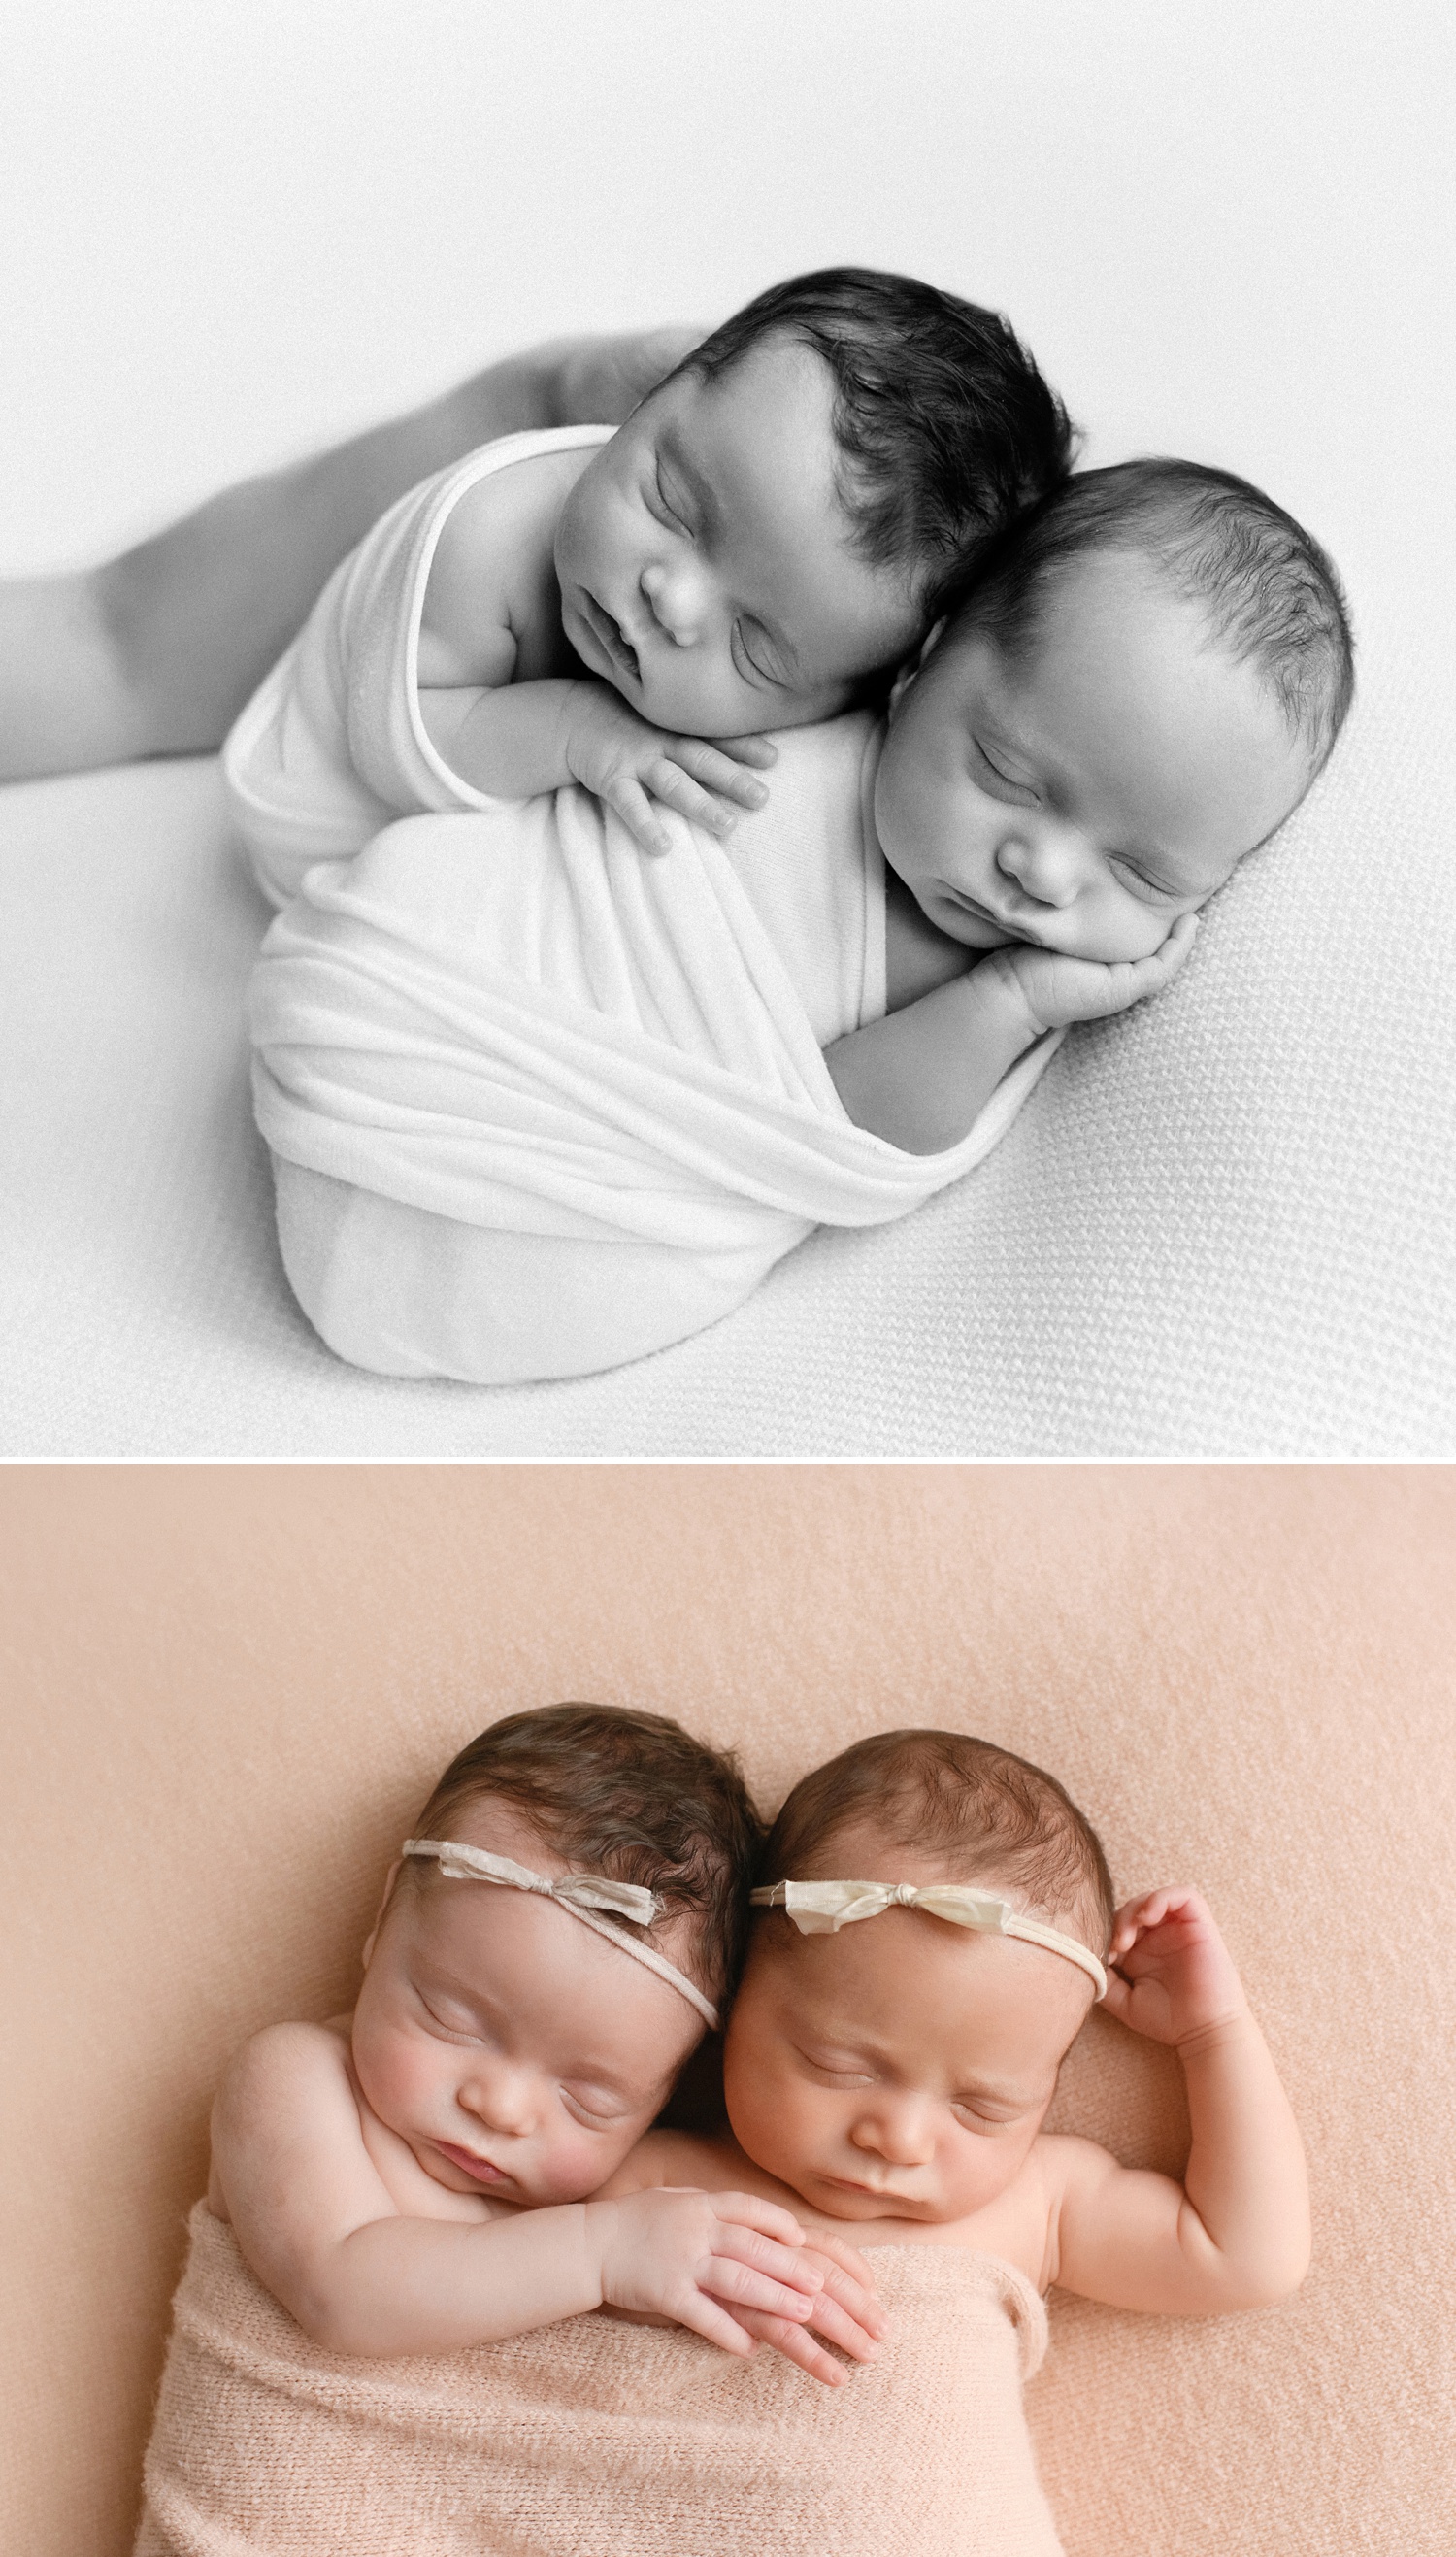 Newborn twins photographed at 3 weeks old at Arcadian Photography's studio in Salem, Oregon.